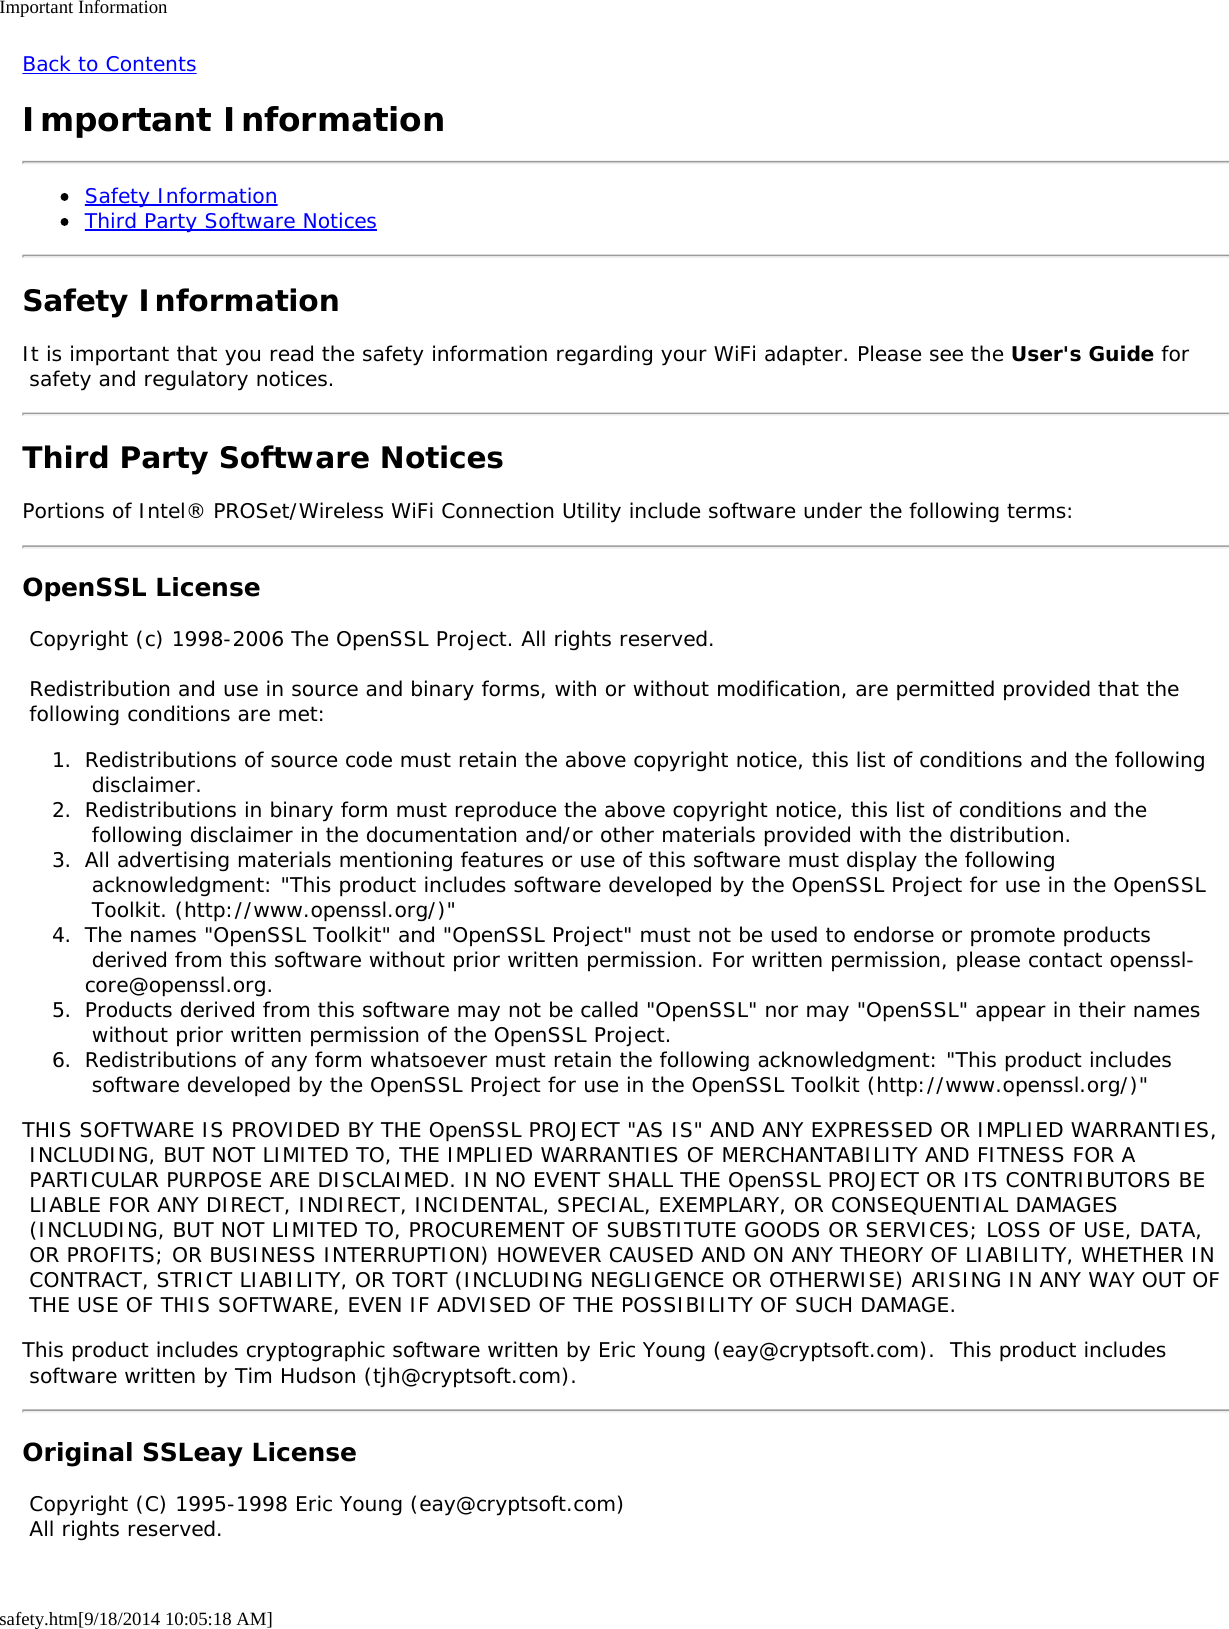 Important Informationsafety.htm[9/18/2014 10:05:18 AM]Back to ContentsImportant InformationSafety InformationThird Party Software NoticesSafety InformationIt is important that you read the safety information regarding your WiFi adapter. Please see the User&apos;s Guide for safety and regulatory notices.Third Party Software NoticesPortions of Intel® PROSet/Wireless WiFi Connection Utility include software under the following terms:OpenSSL License Copyright (c) 1998-2006 The OpenSSL Project. All rights reserved. Redistribution and use in source and binary forms, with or without modification, are permitted provided that the following conditions are met:1.  Redistributions of source code must retain the above copyright notice, this list of conditions and the following disclaimer.2.  Redistributions in binary form must reproduce the above copyright notice, this list of conditions and the following disclaimer in the documentation and/or other materials provided with the distribution.3.  All advertising materials mentioning features or use of this software must display the following acknowledgment: &quot;This product includes software developed by the OpenSSL Project for use in the OpenSSL Toolkit. (http://www.openssl.org/)&quot;4.  The names &quot;OpenSSL Toolkit&quot; and &quot;OpenSSL Project&quot; must not be used to endorse or promote products derived from this software without prior written permission. For written permission, please contact openssl-core@openssl.org.5.  Products derived from this software may not be called &quot;OpenSSL&quot; nor may &quot;OpenSSL&quot; appear in their names without prior written permission of the OpenSSL Project.6.  Redistributions of any form whatsoever must retain the following acknowledgment: &quot;This product includes software developed by the OpenSSL Project for use in the OpenSSL Toolkit (http://www.openssl.org/)&quot;THIS SOFTWARE IS PROVIDED BY THE OpenSSL PROJECT &quot;AS IS&quot; AND ANY EXPRESSED OR IMPLIED WARRANTIES, INCLUDING, BUT NOT LIMITED TO, THE IMPLIED WARRANTIES OF MERCHANTABILITY AND FITNESS FOR A PARTICULAR PURPOSE ARE DISCLAIMED. IN NO EVENT SHALL THE OpenSSL PROJECT OR ITS CONTRIBUTORS BE LIABLE FOR ANY DIRECT, INDIRECT, INCIDENTAL, SPECIAL, EXEMPLARY, OR CONSEQUENTIAL DAMAGES (INCLUDING, BUT NOT LIMITED TO, PROCUREMENT OF SUBSTITUTE GOODS OR SERVICES; LOSS OF USE, DATA, OR PROFITS; OR BUSINESS INTERRUPTION) HOWEVER CAUSED AND ON ANY THEORY OF LIABILITY, WHETHER IN CONTRACT, STRICT LIABILITY, OR TORT (INCLUDING NEGLIGENCE OR OTHERWISE) ARISING IN ANY WAY OUT OF THE USE OF THIS SOFTWARE, EVEN IF ADVISED OF THE POSSIBILITY OF SUCH DAMAGE.This product includes cryptographic software written by Eric Young (eay@cryptsoft.com).  This product includes software written by Tim Hudson (tjh@cryptsoft.com).Original SSLeay License Copyright (C) 1995-1998 Eric Young (eay@cryptsoft.com) All rights reserved.